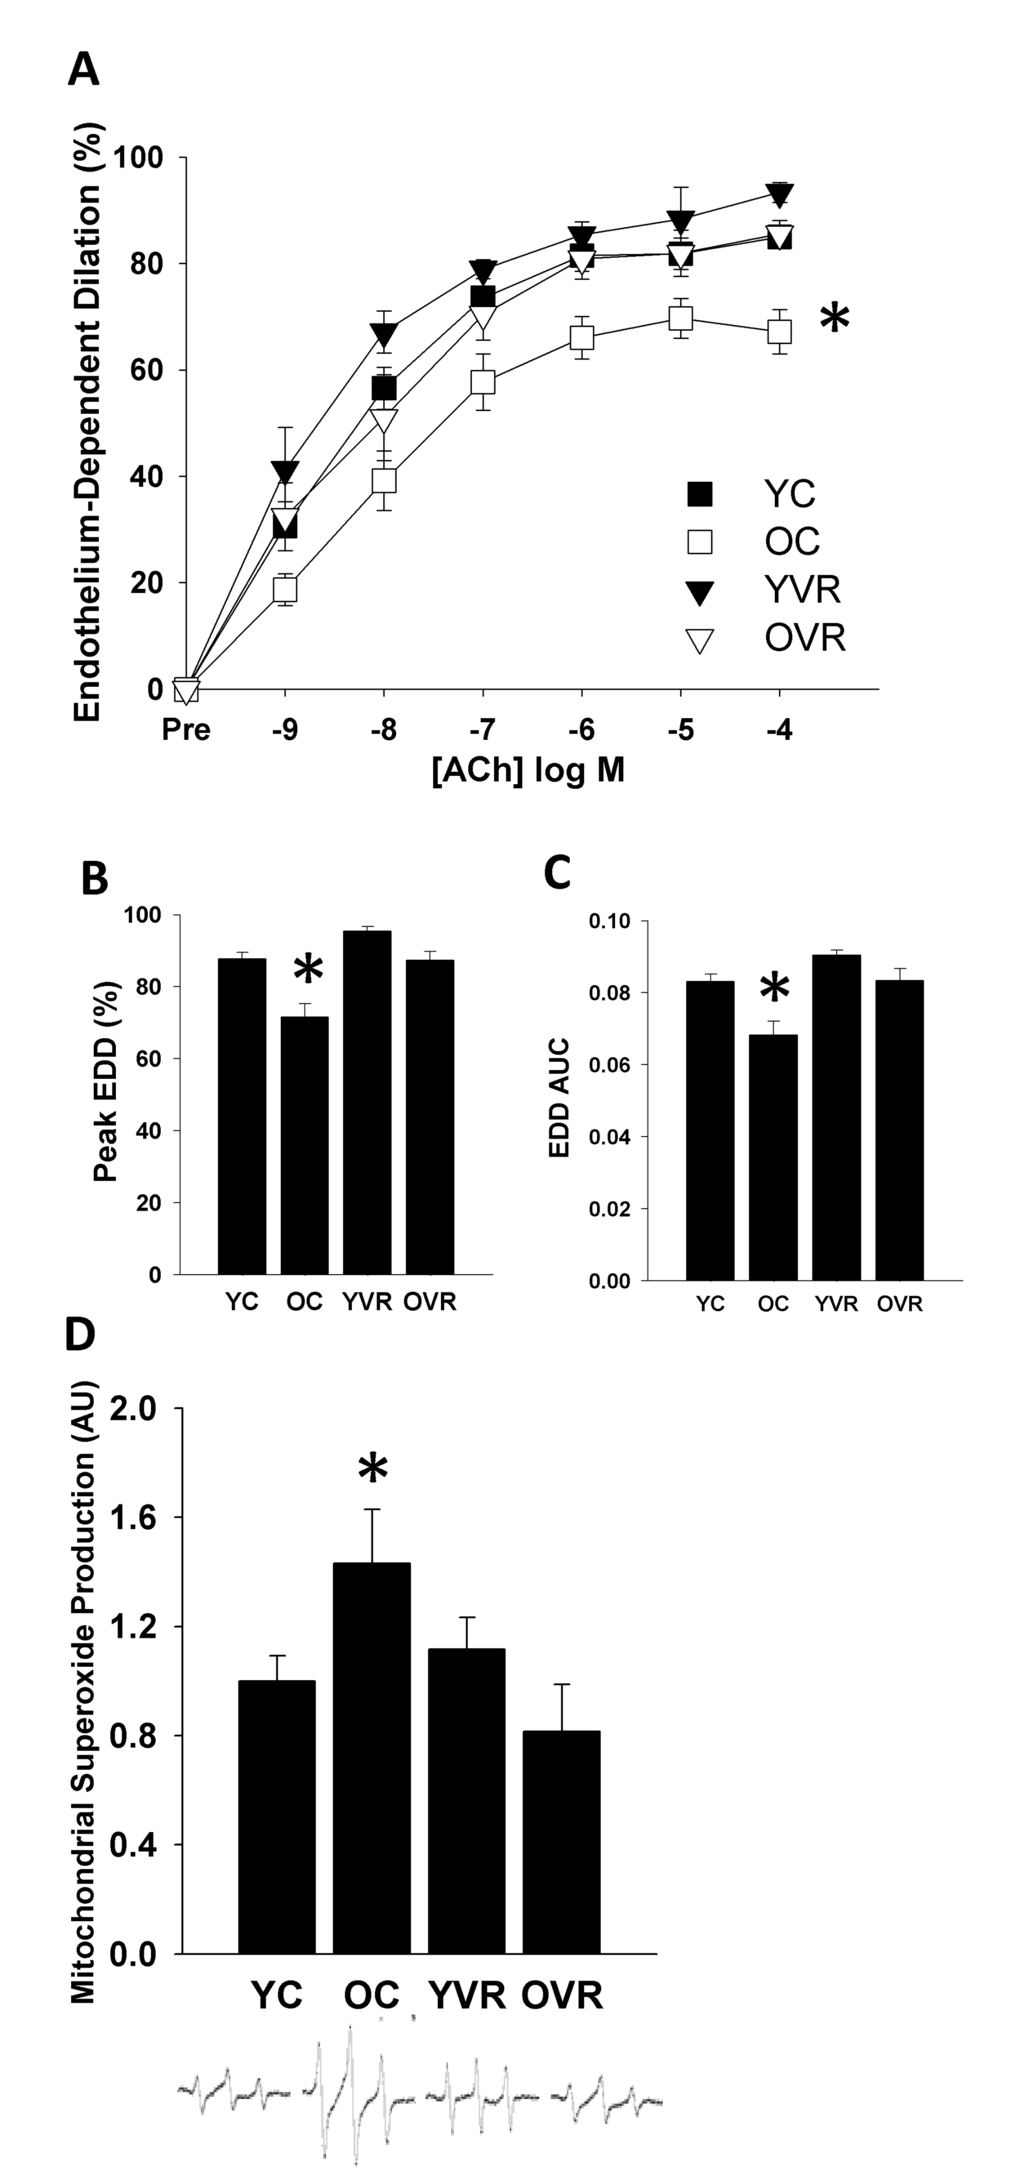 Voluntary aerobic exercise restores endothelium-dependent dilation and normalizes mitochondrial superoxide production in old mice. Endothelium-dependent dilation (EDD) dose-response (A) to acetylcholine (ACh), peak dilation (B), and EDD AUC (C) in carotid arteries and aortic mitochondria-specific superoxide production (D) in young control (YC), old control (OC), young voluntary wheel running (YVR) and old voluntary wheel running (OVR) mice. Representative EPR spectra presented below panel D. Data are presented as means with error bars representing SEM, n=10-12 per group. * pFigures 2 and 3 for clarity of interpretation of within-group changes in EDD in the presence of acute stressors.